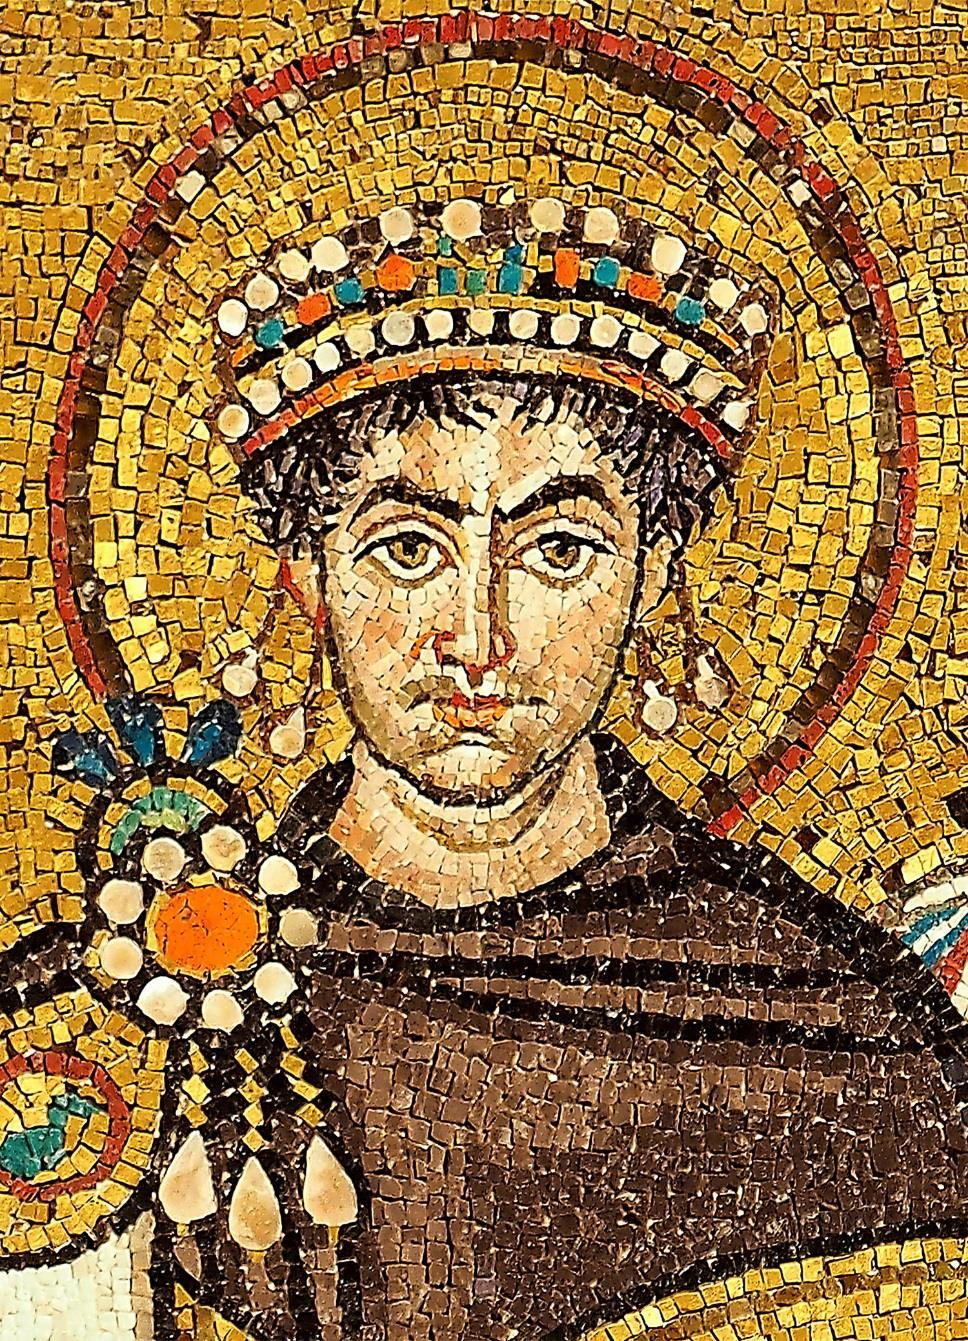 Emperor Justinian and Early Byzantium (527-726) Considered it his duty to wipeout all cult religions and any form of Christianity other than Orthodox All Byzantine emperors considered themselves the